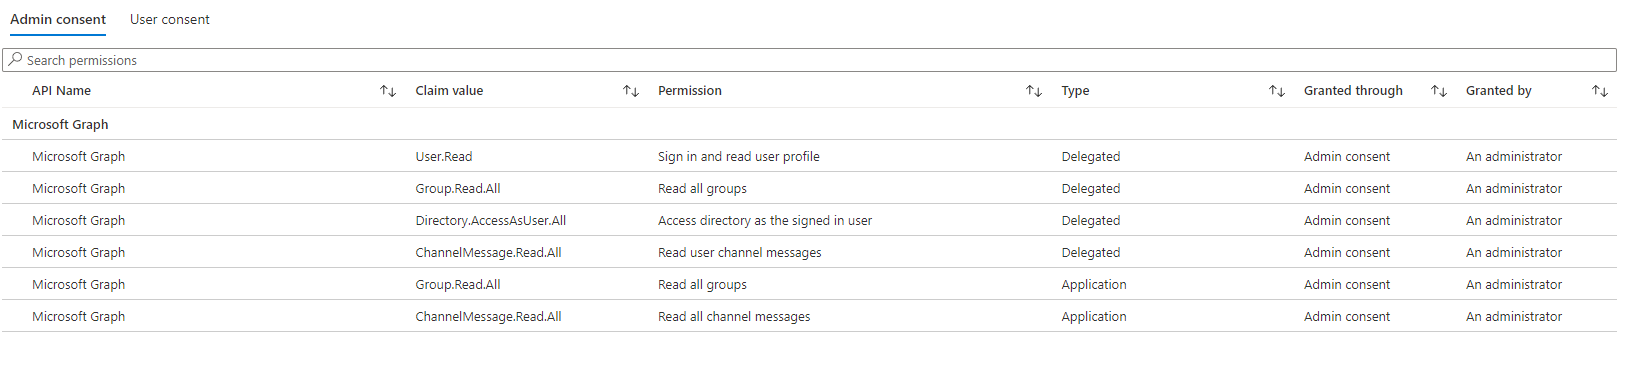 Synology permissions in Azure application.